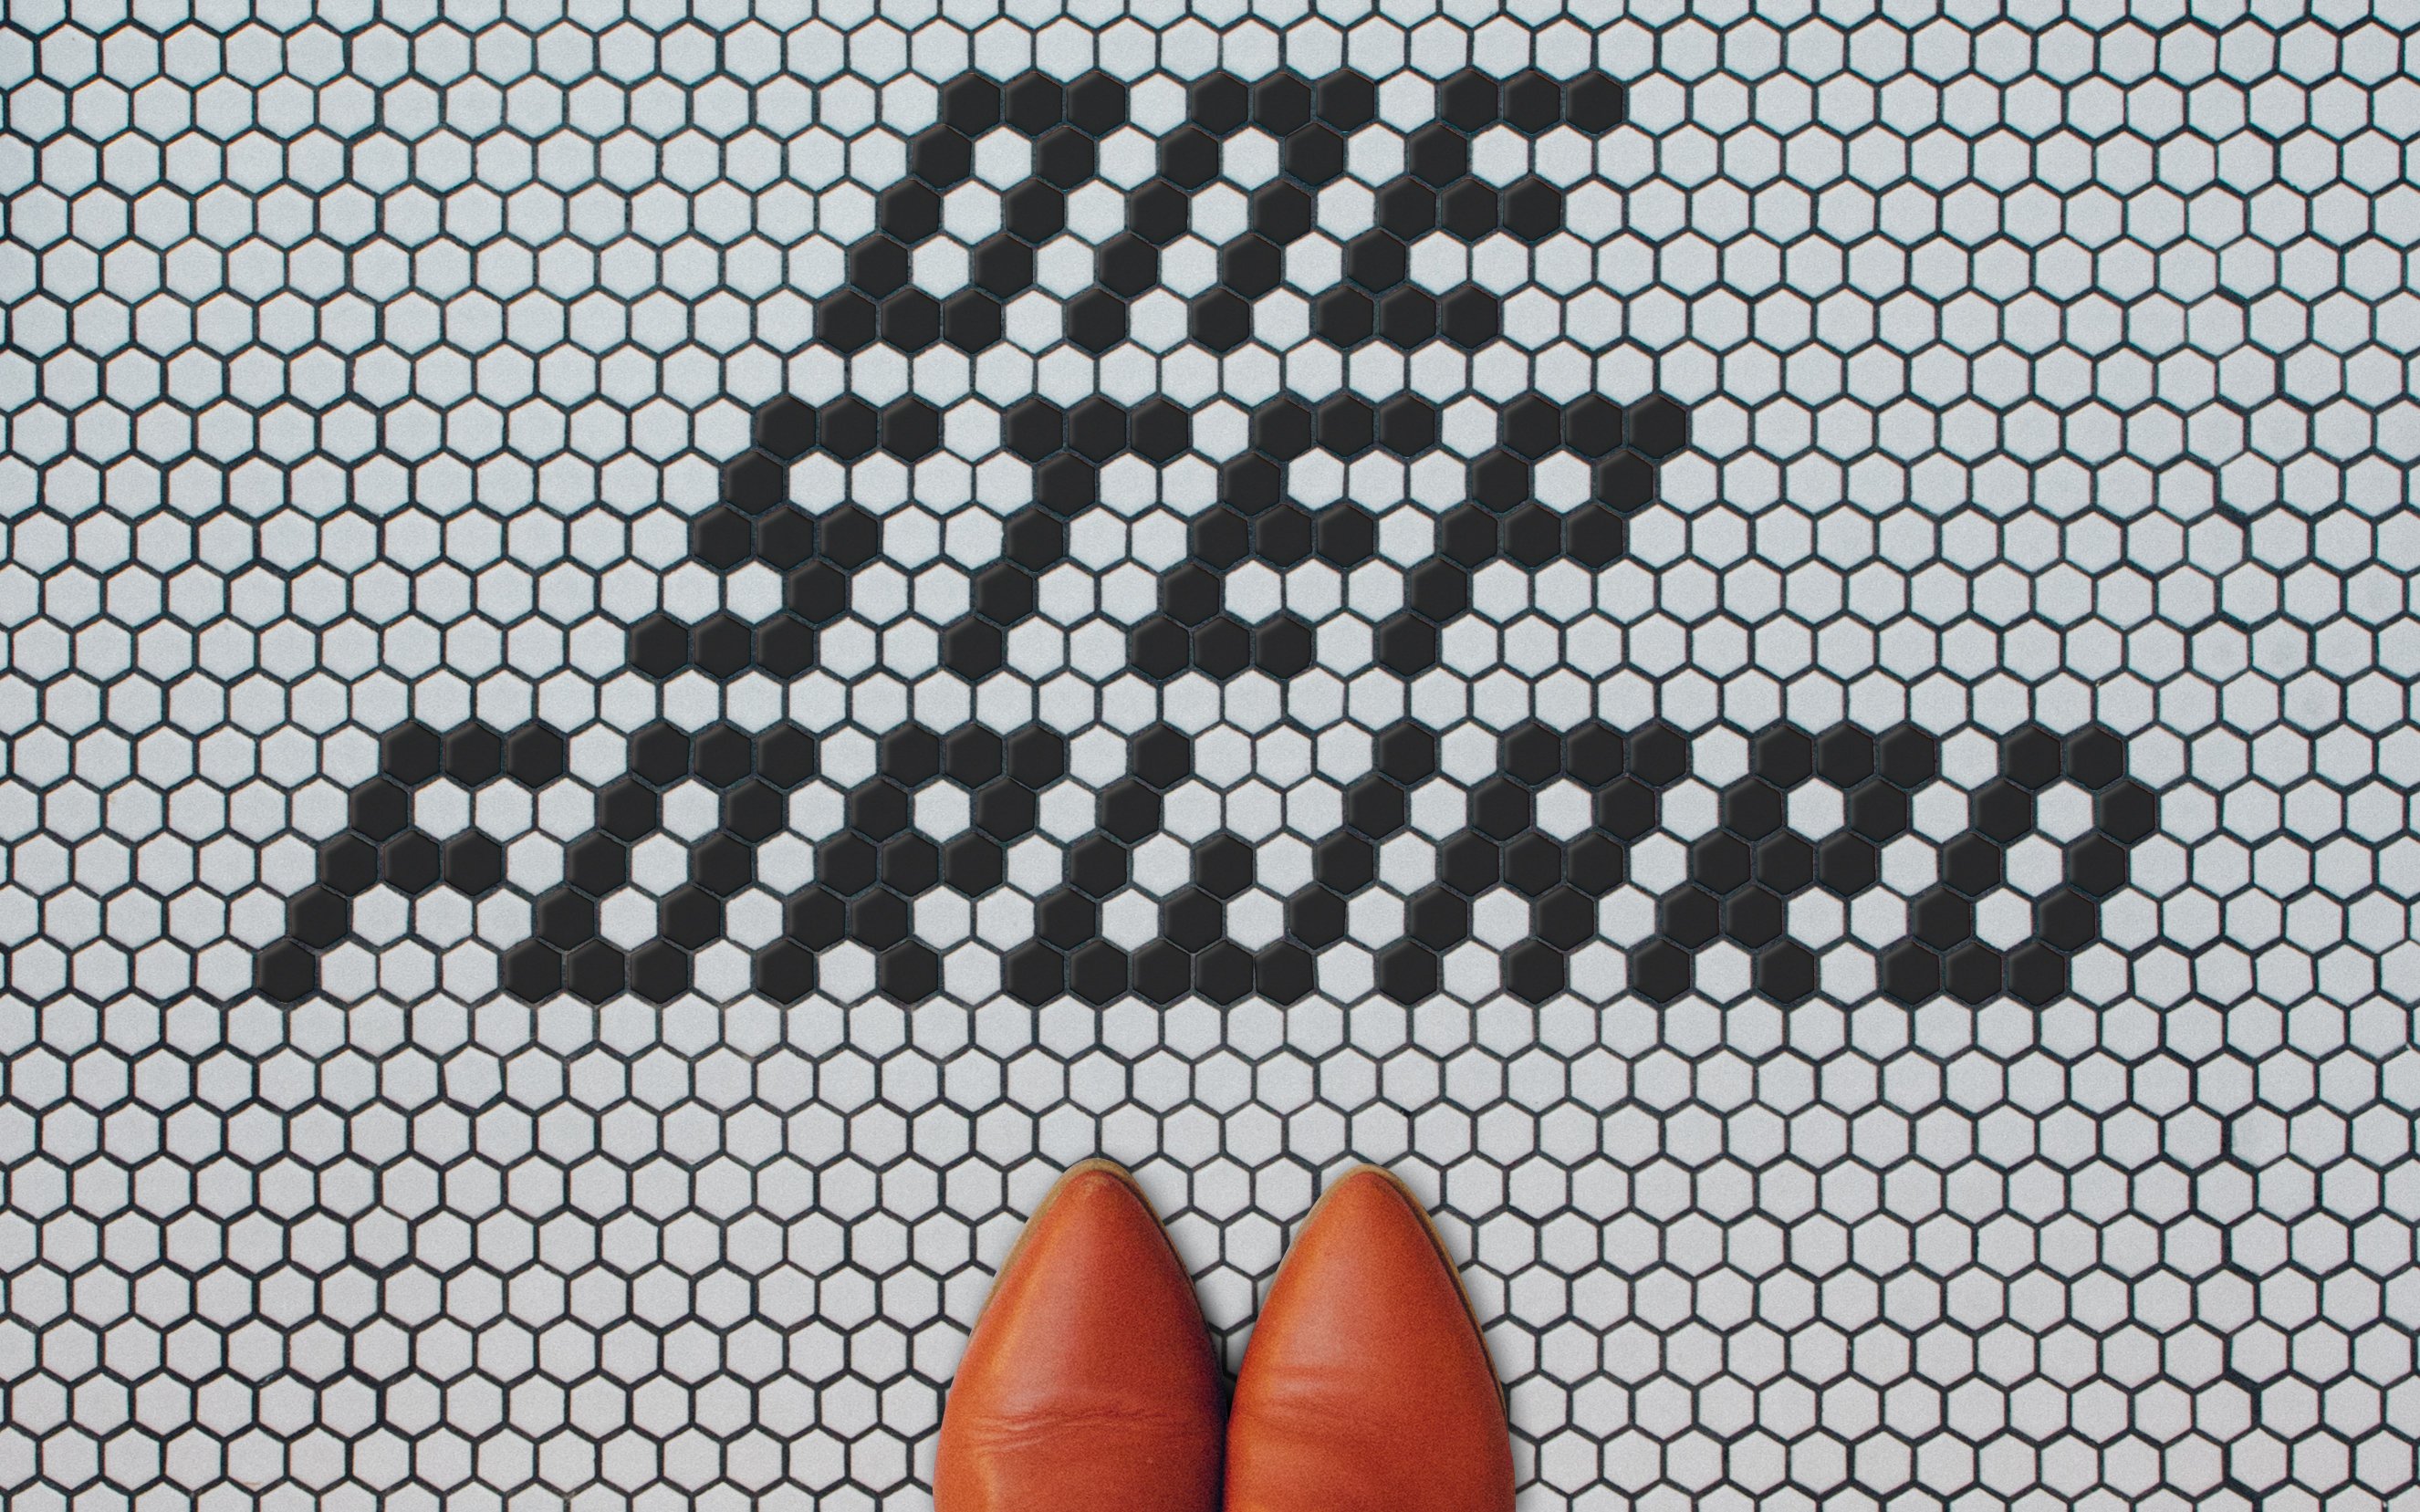 A tiled floor saying 'one step forward' next to a pair of shoes